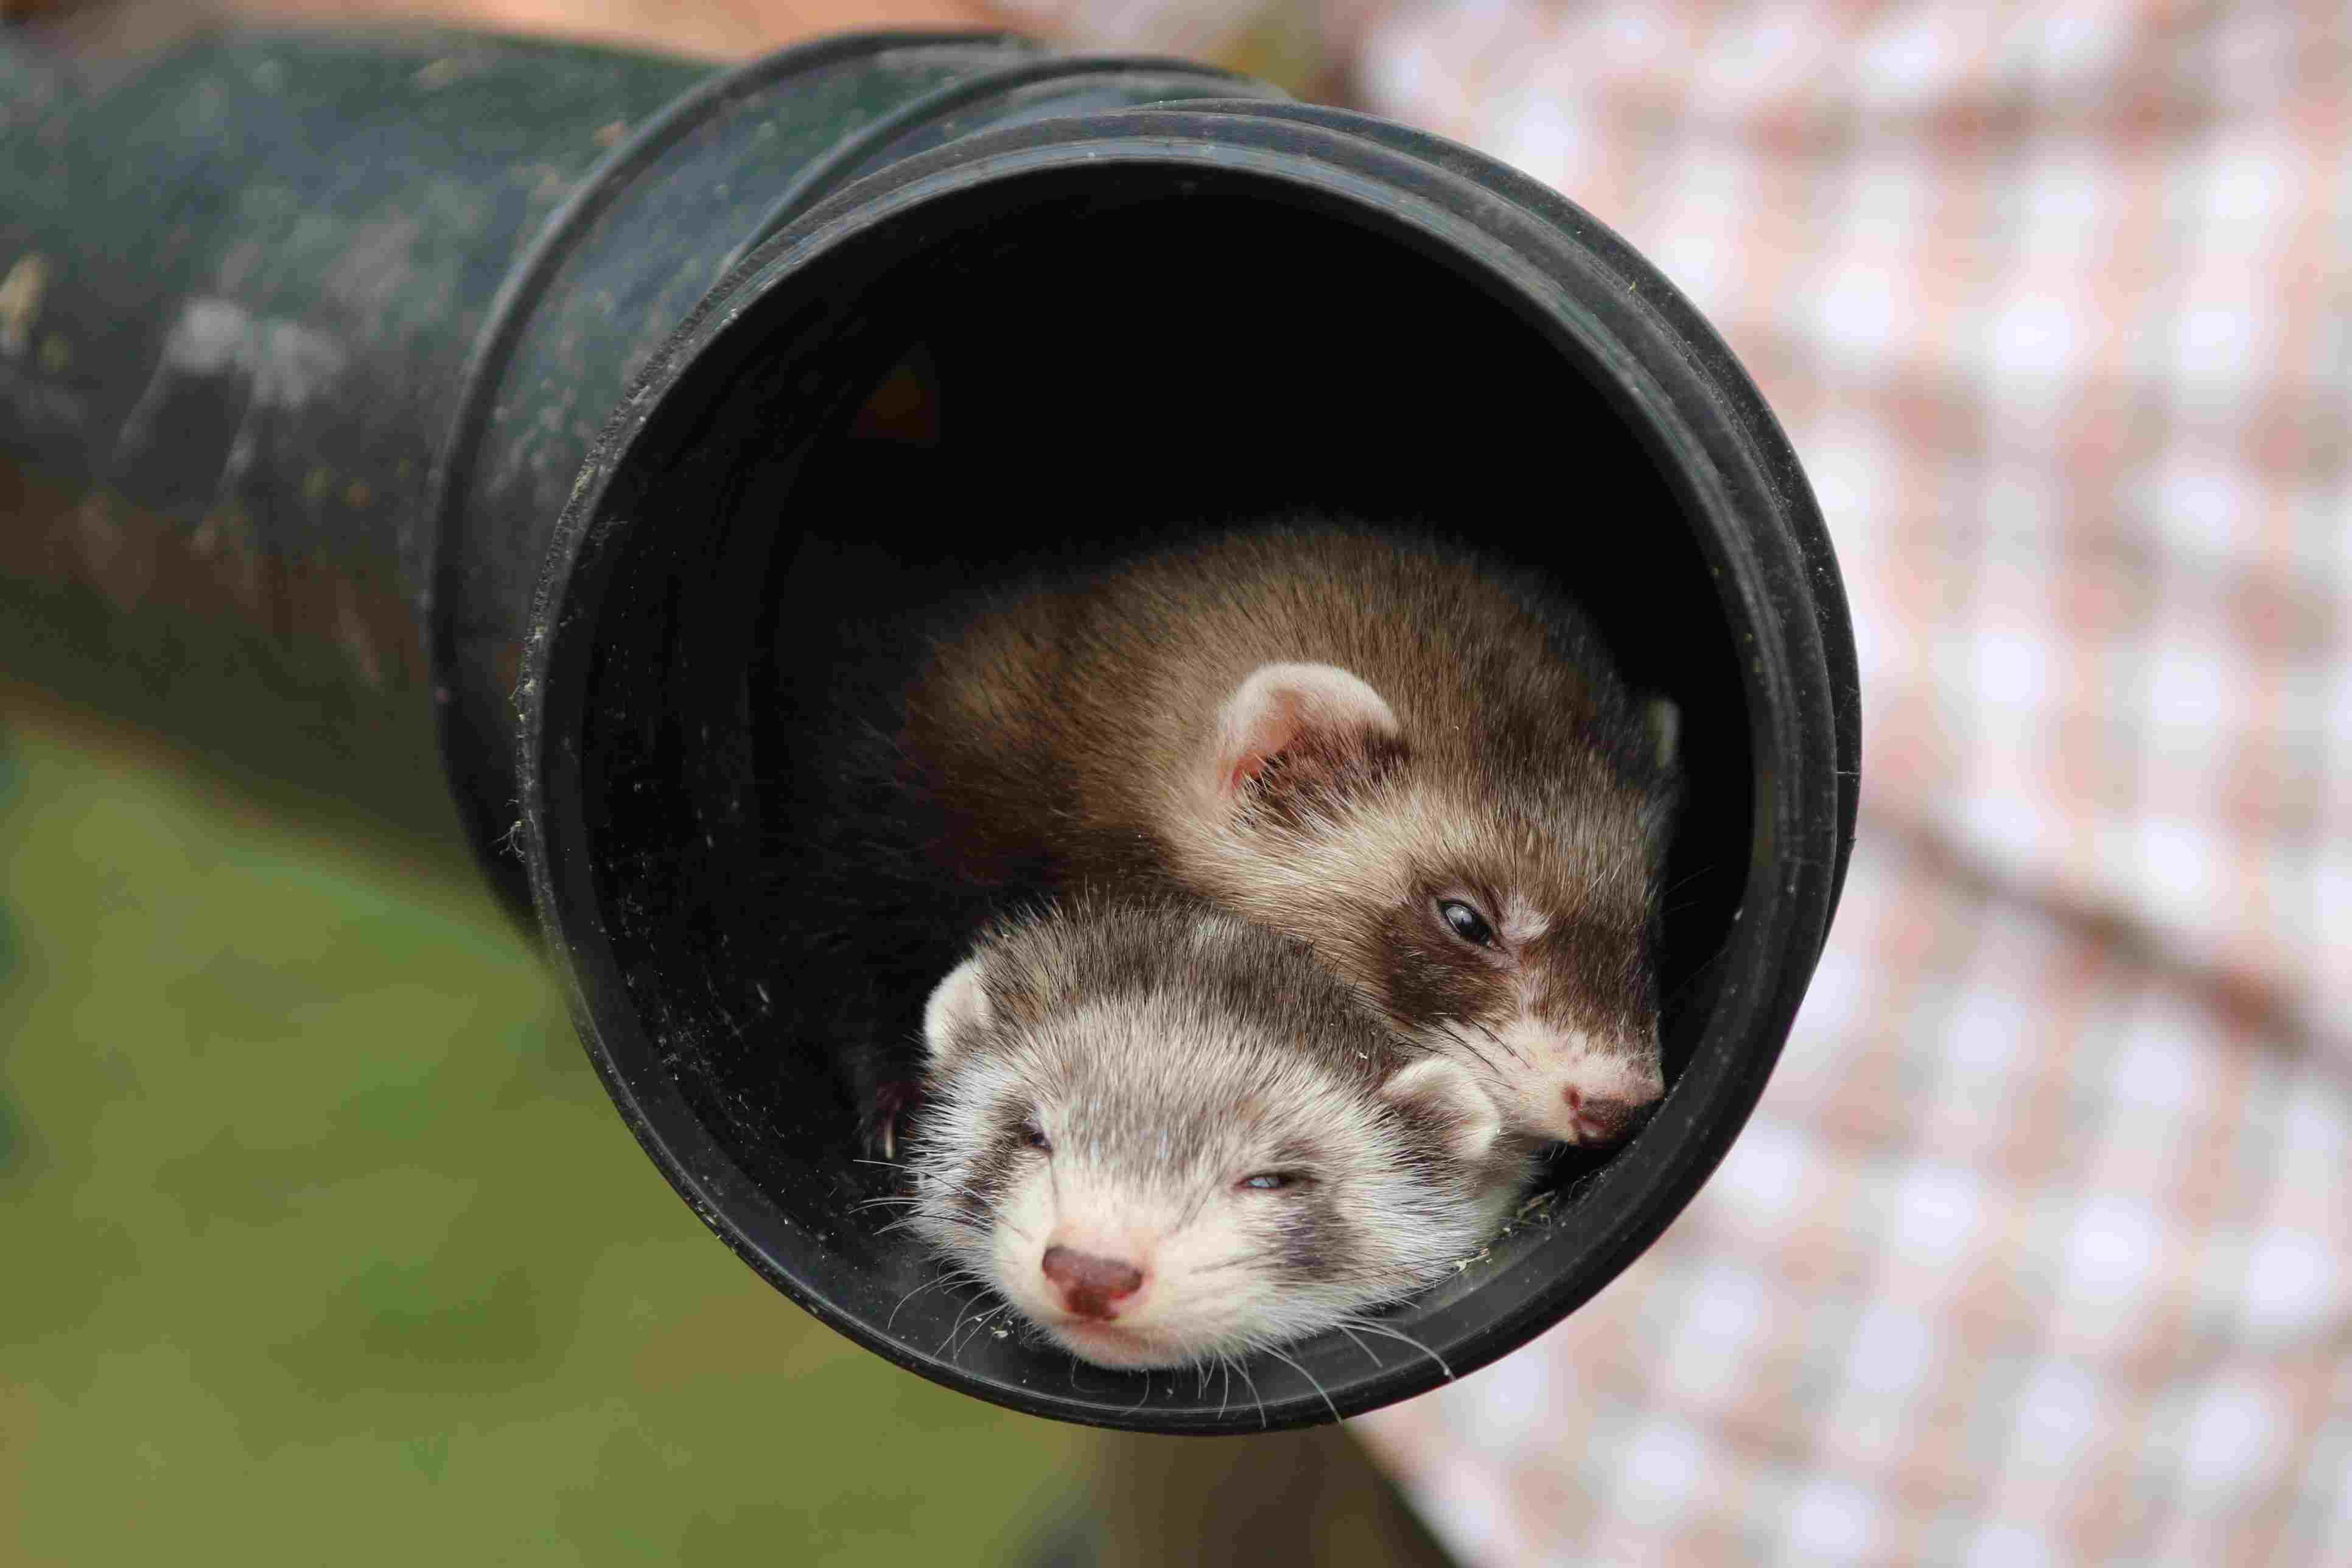 Two ferrets in a pipe